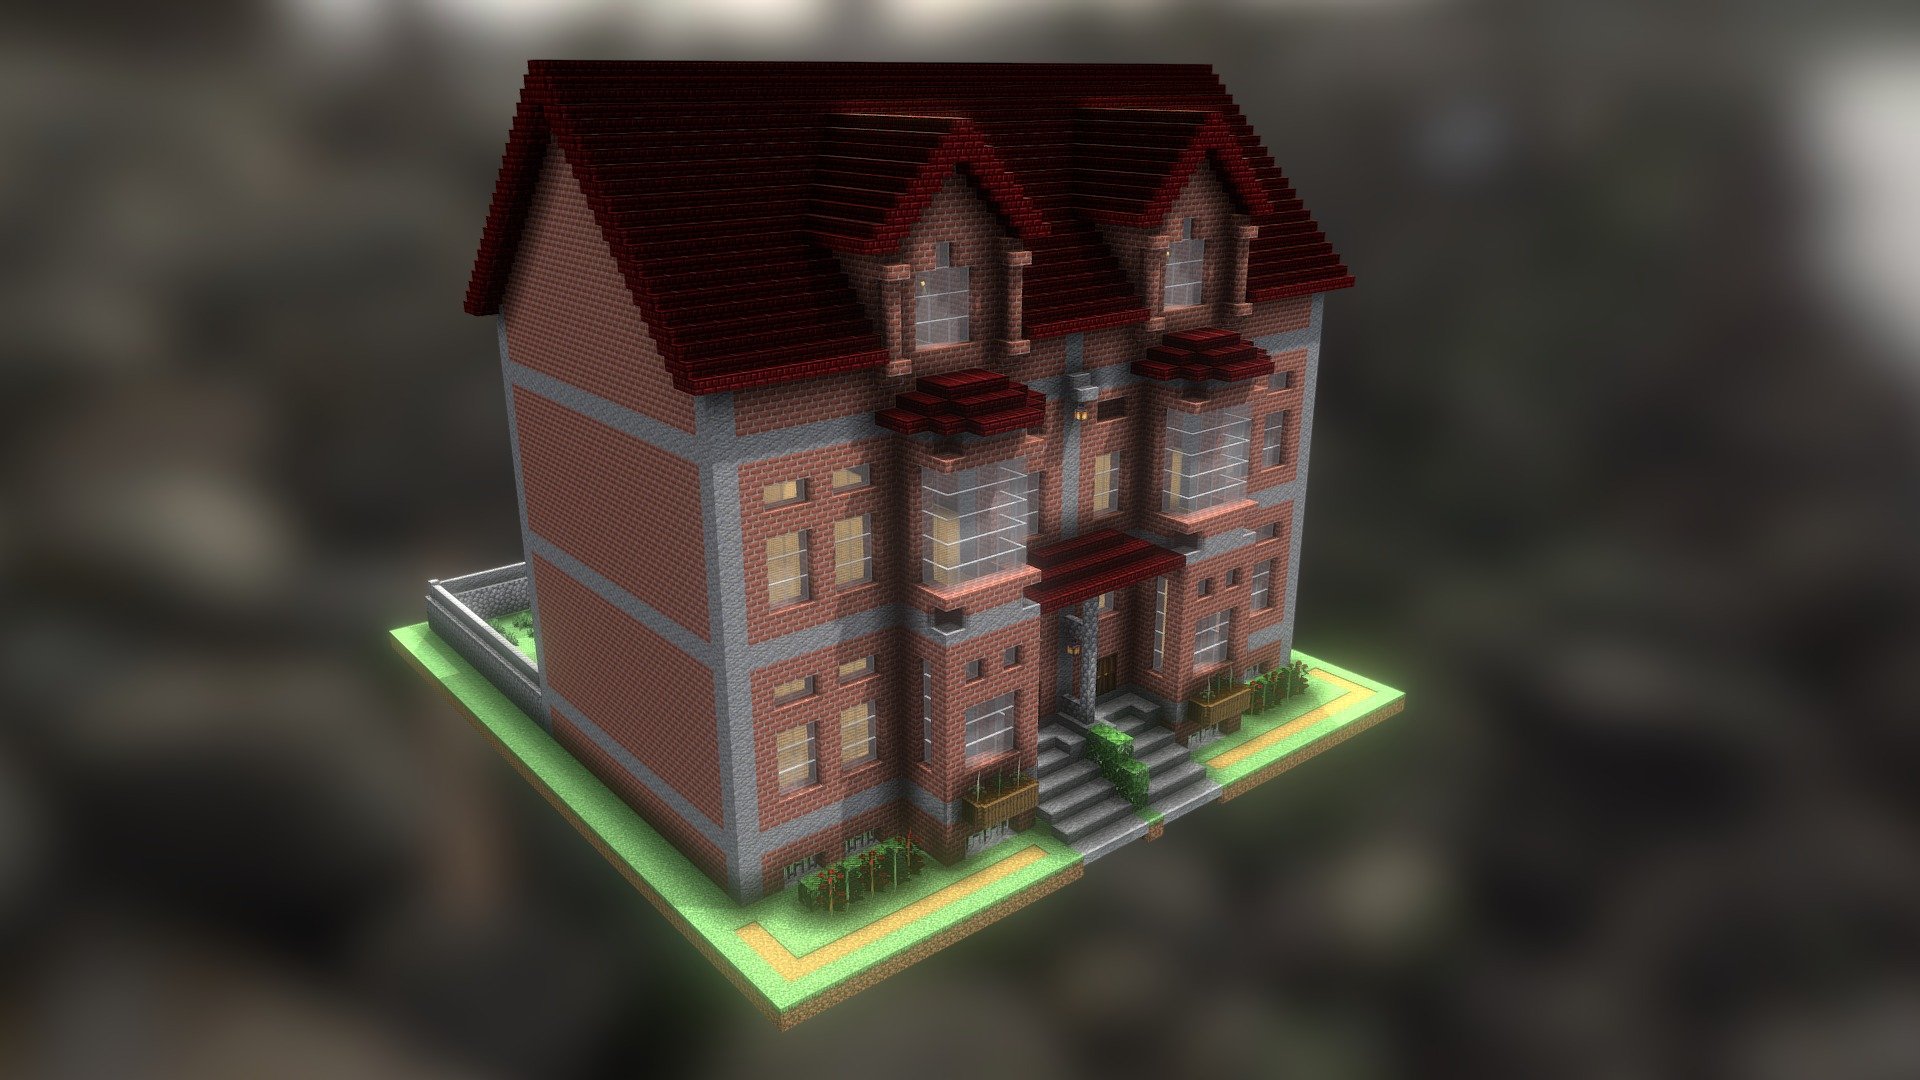 Minecraft Immeuble Building 3 - Download Free 3D model by RH (@rhoce